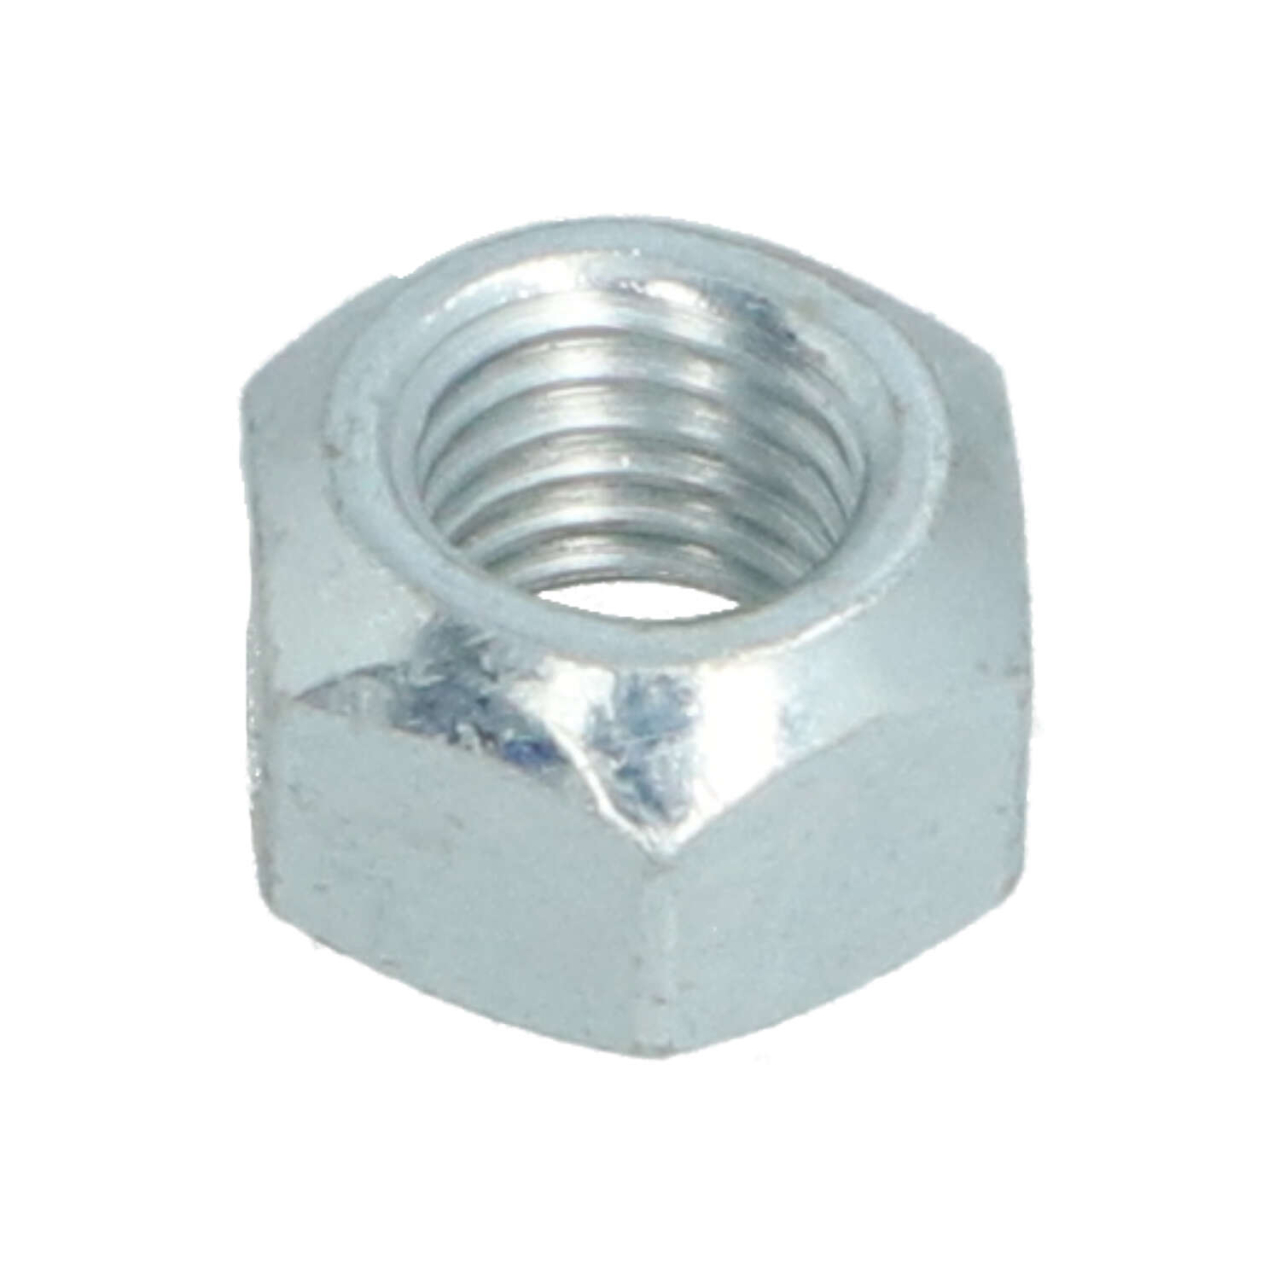 All-metal nut with squeezing device M14x2 - DIN980 galv. 10.9